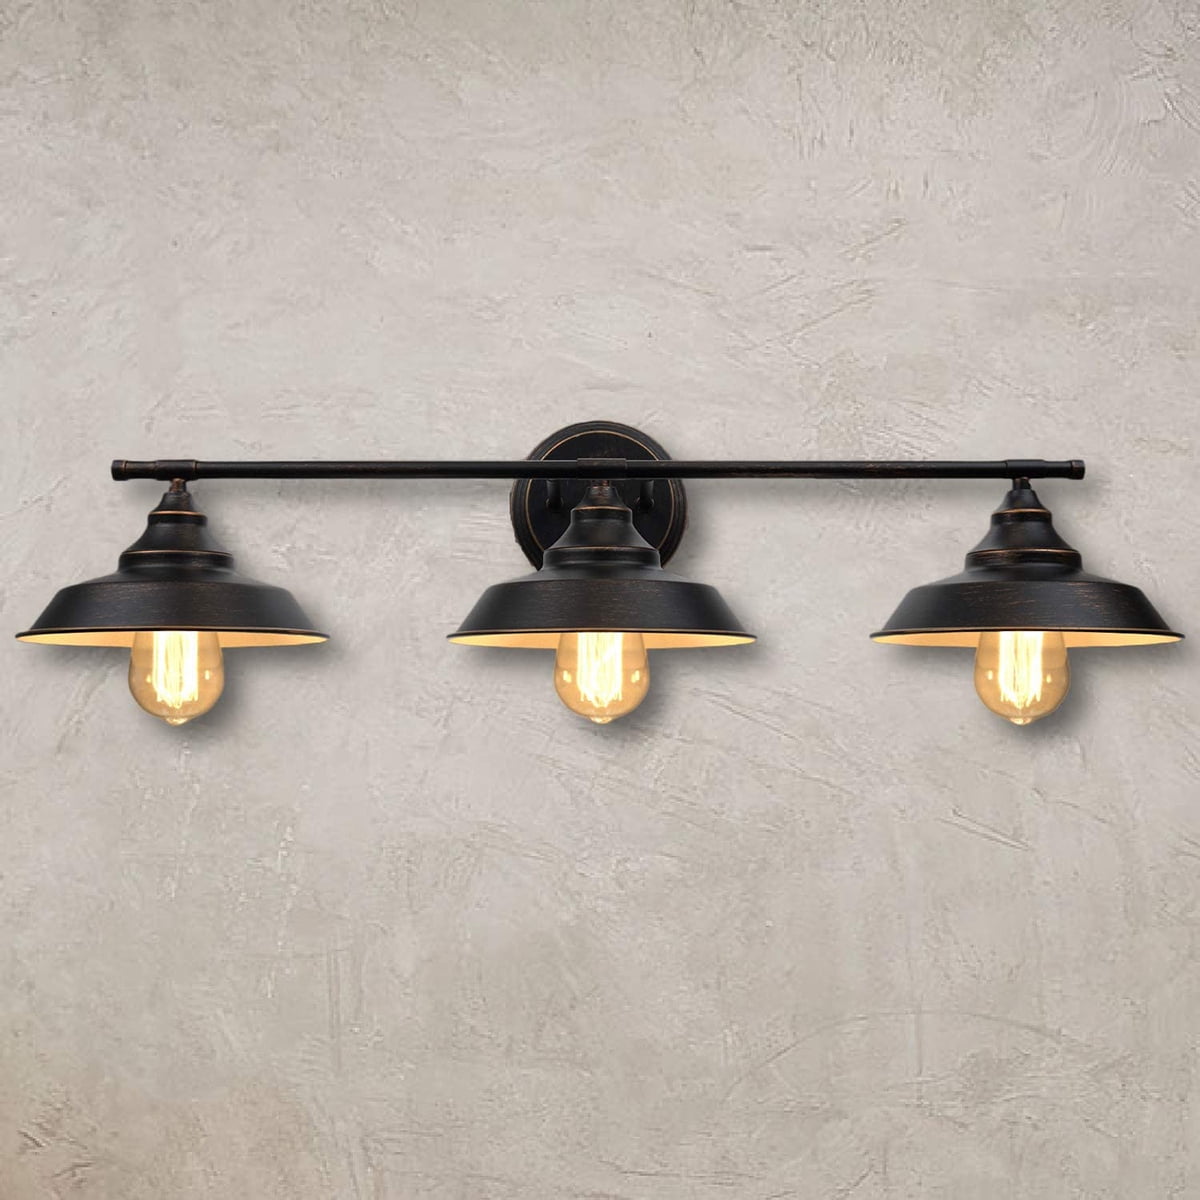 US 2pcs Wall Light Fixtures Rustic Vintage Iron Sconce Outdoor Edison Lamp Shade 